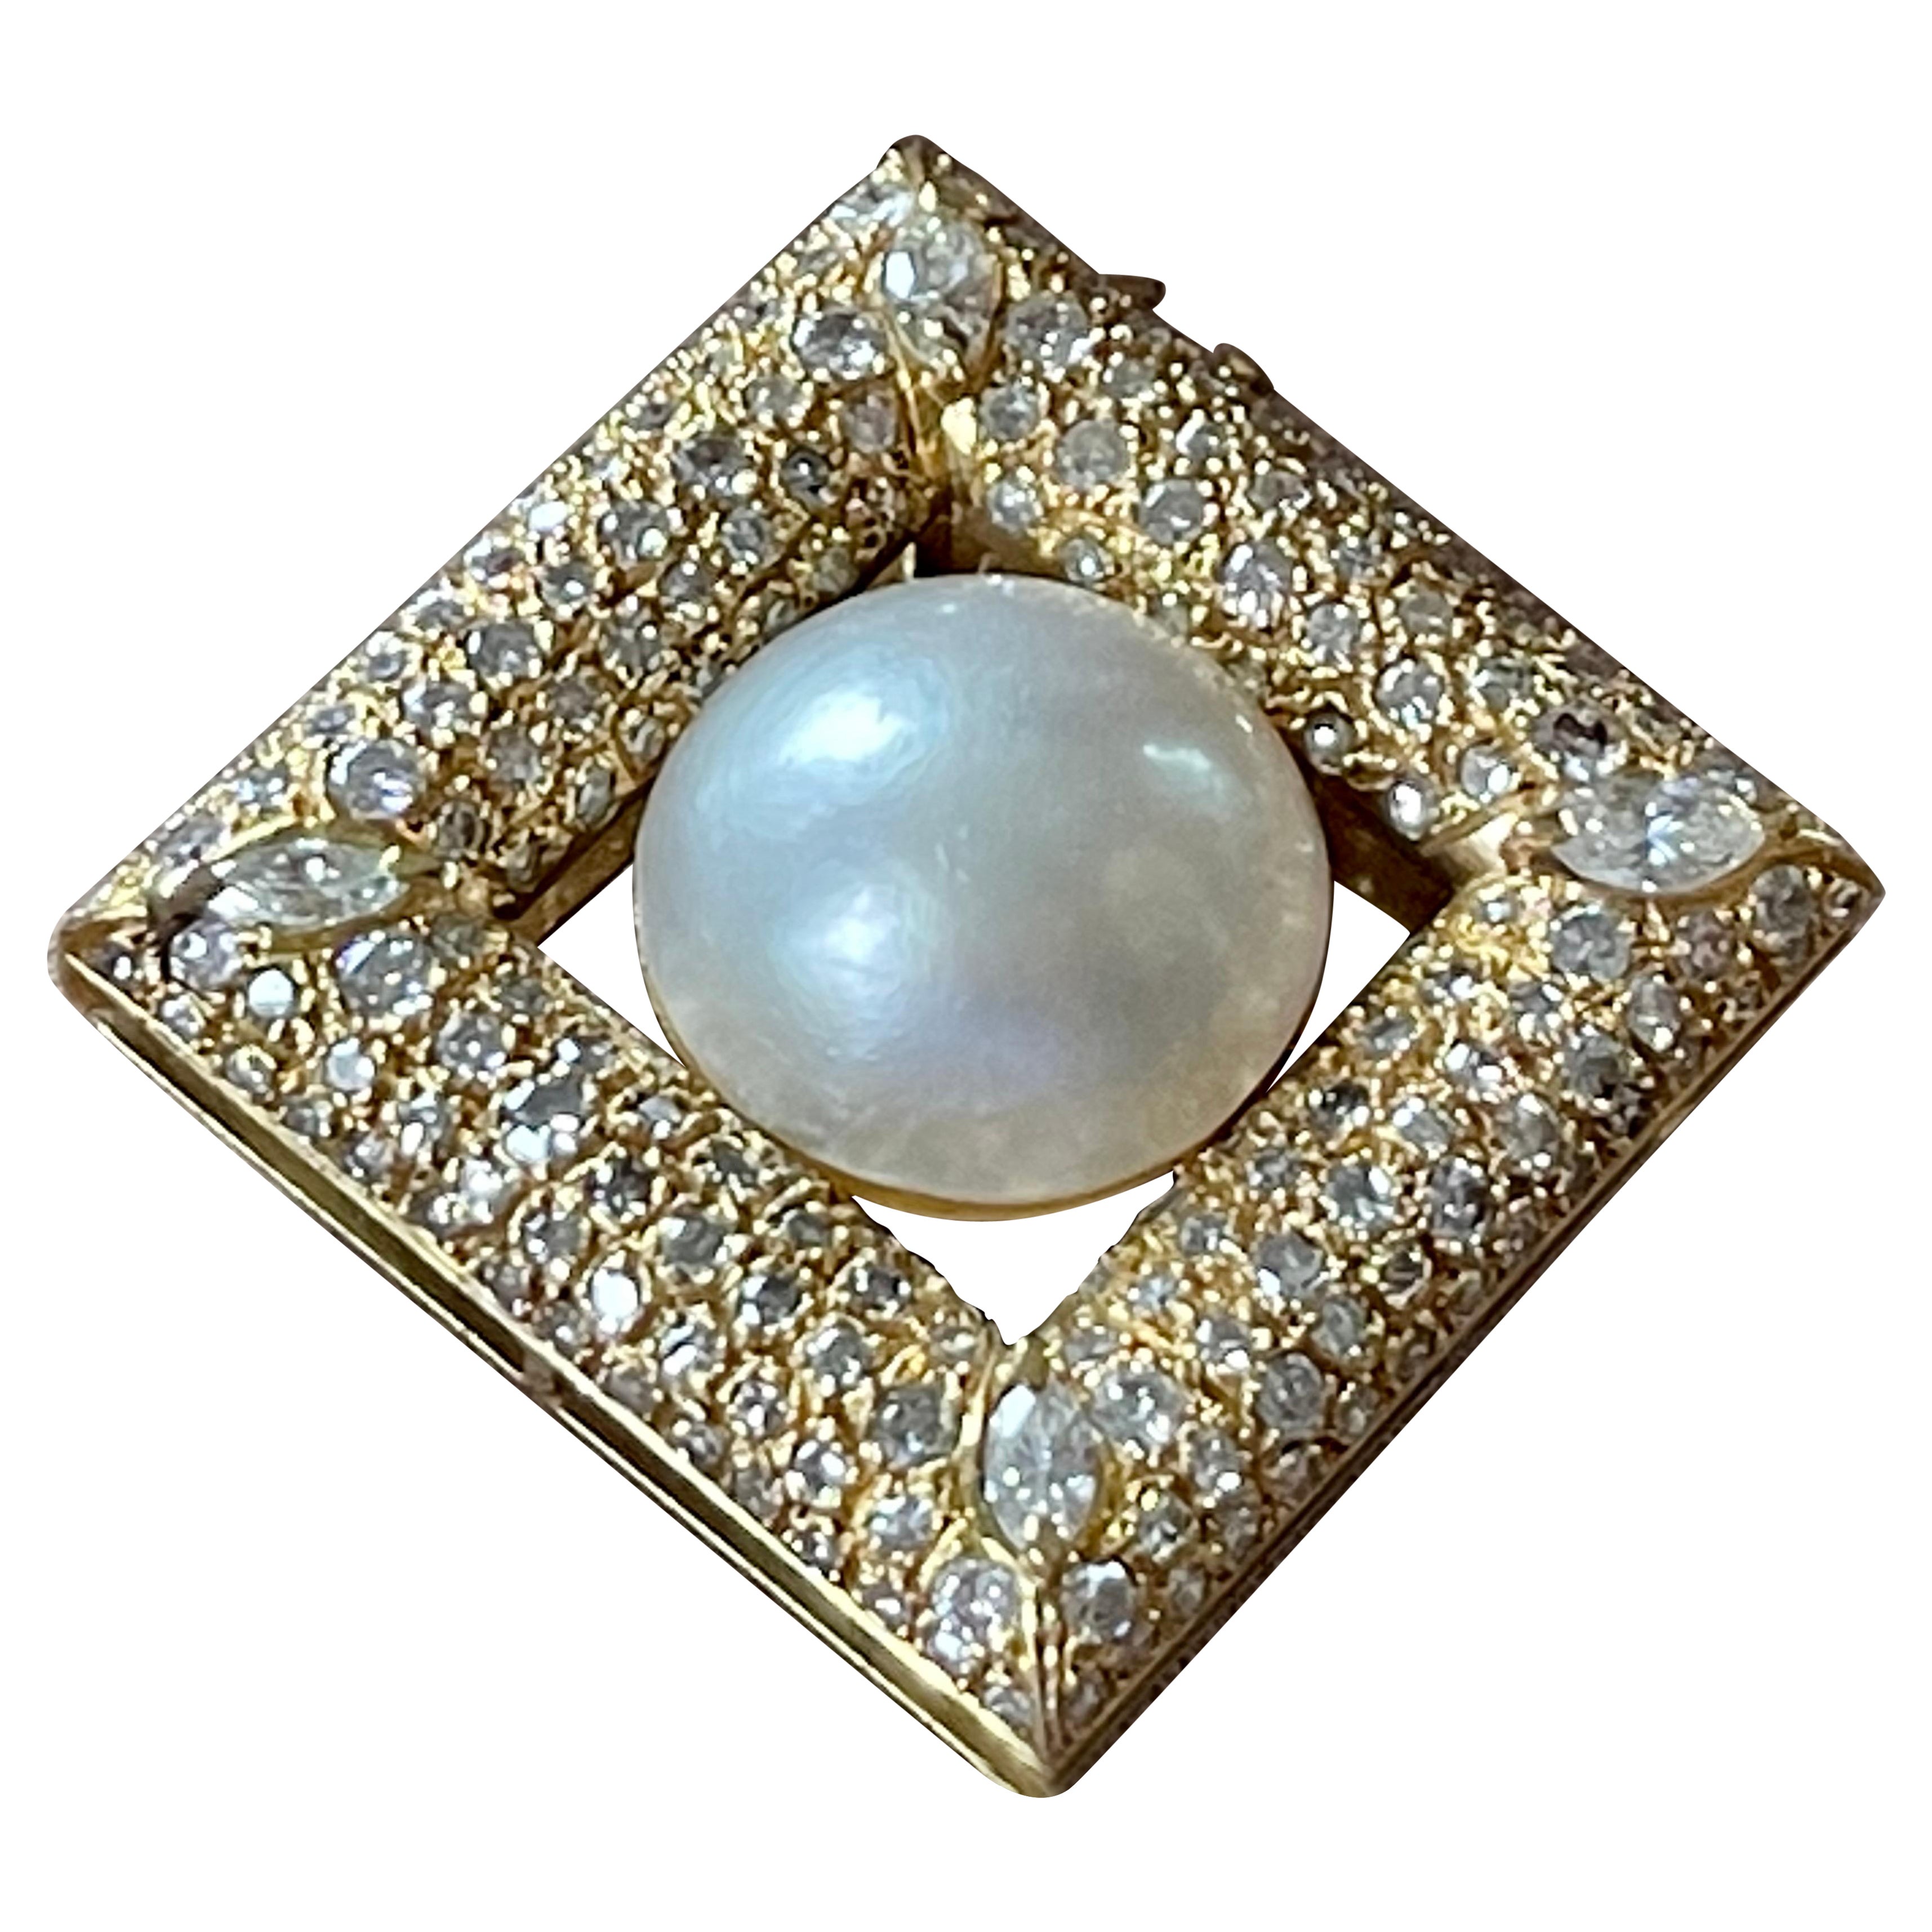 Vintage Brooch 18 K Yellow Gold Diamonds Mabe Pearl